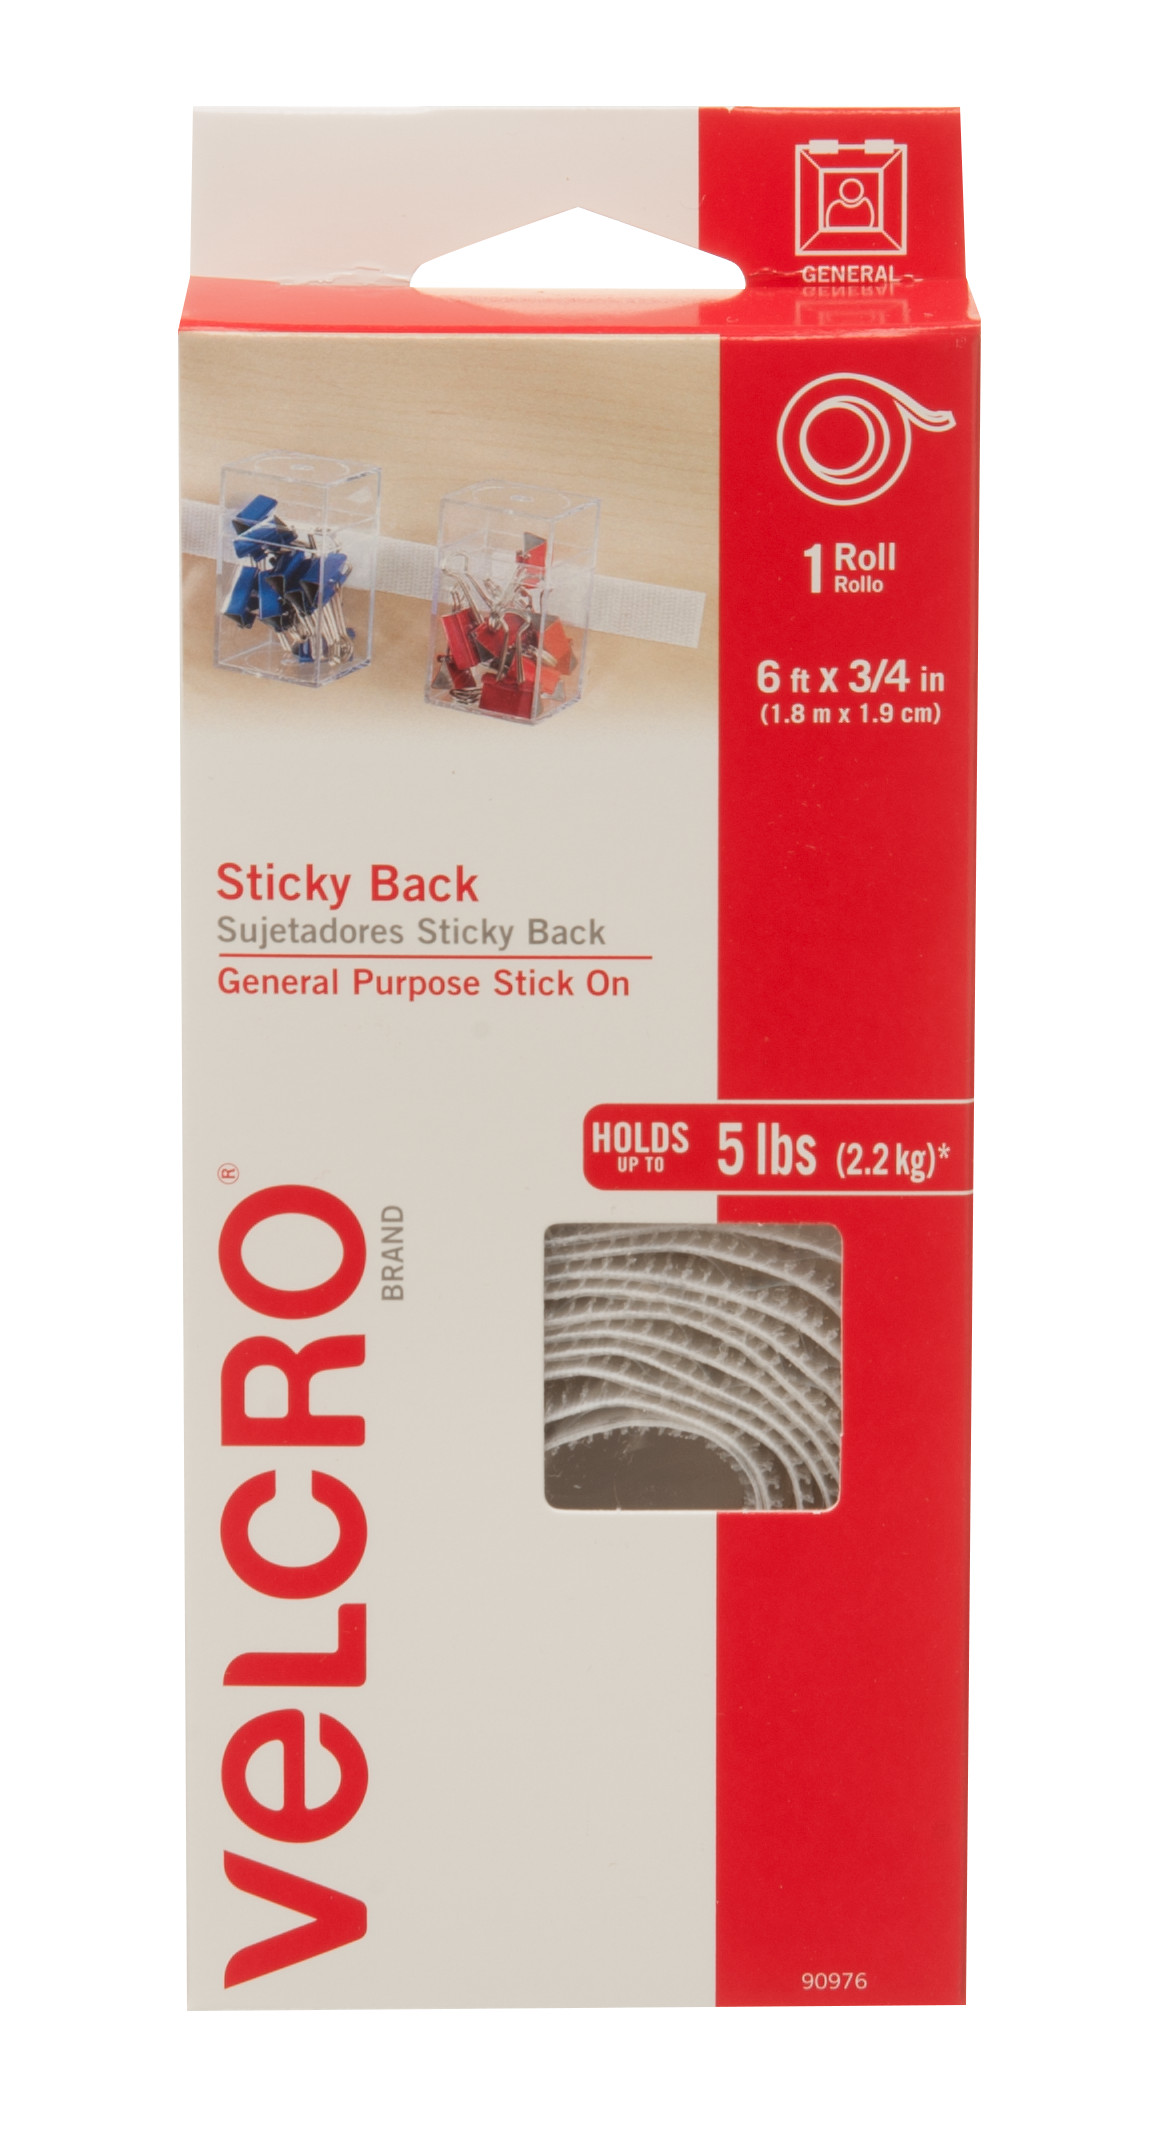 VELCRO Brand Sticky Back Hook & Loop Fasteners, Peel and Stick Permanent  Tape 6ft x 3/4in Roll White 